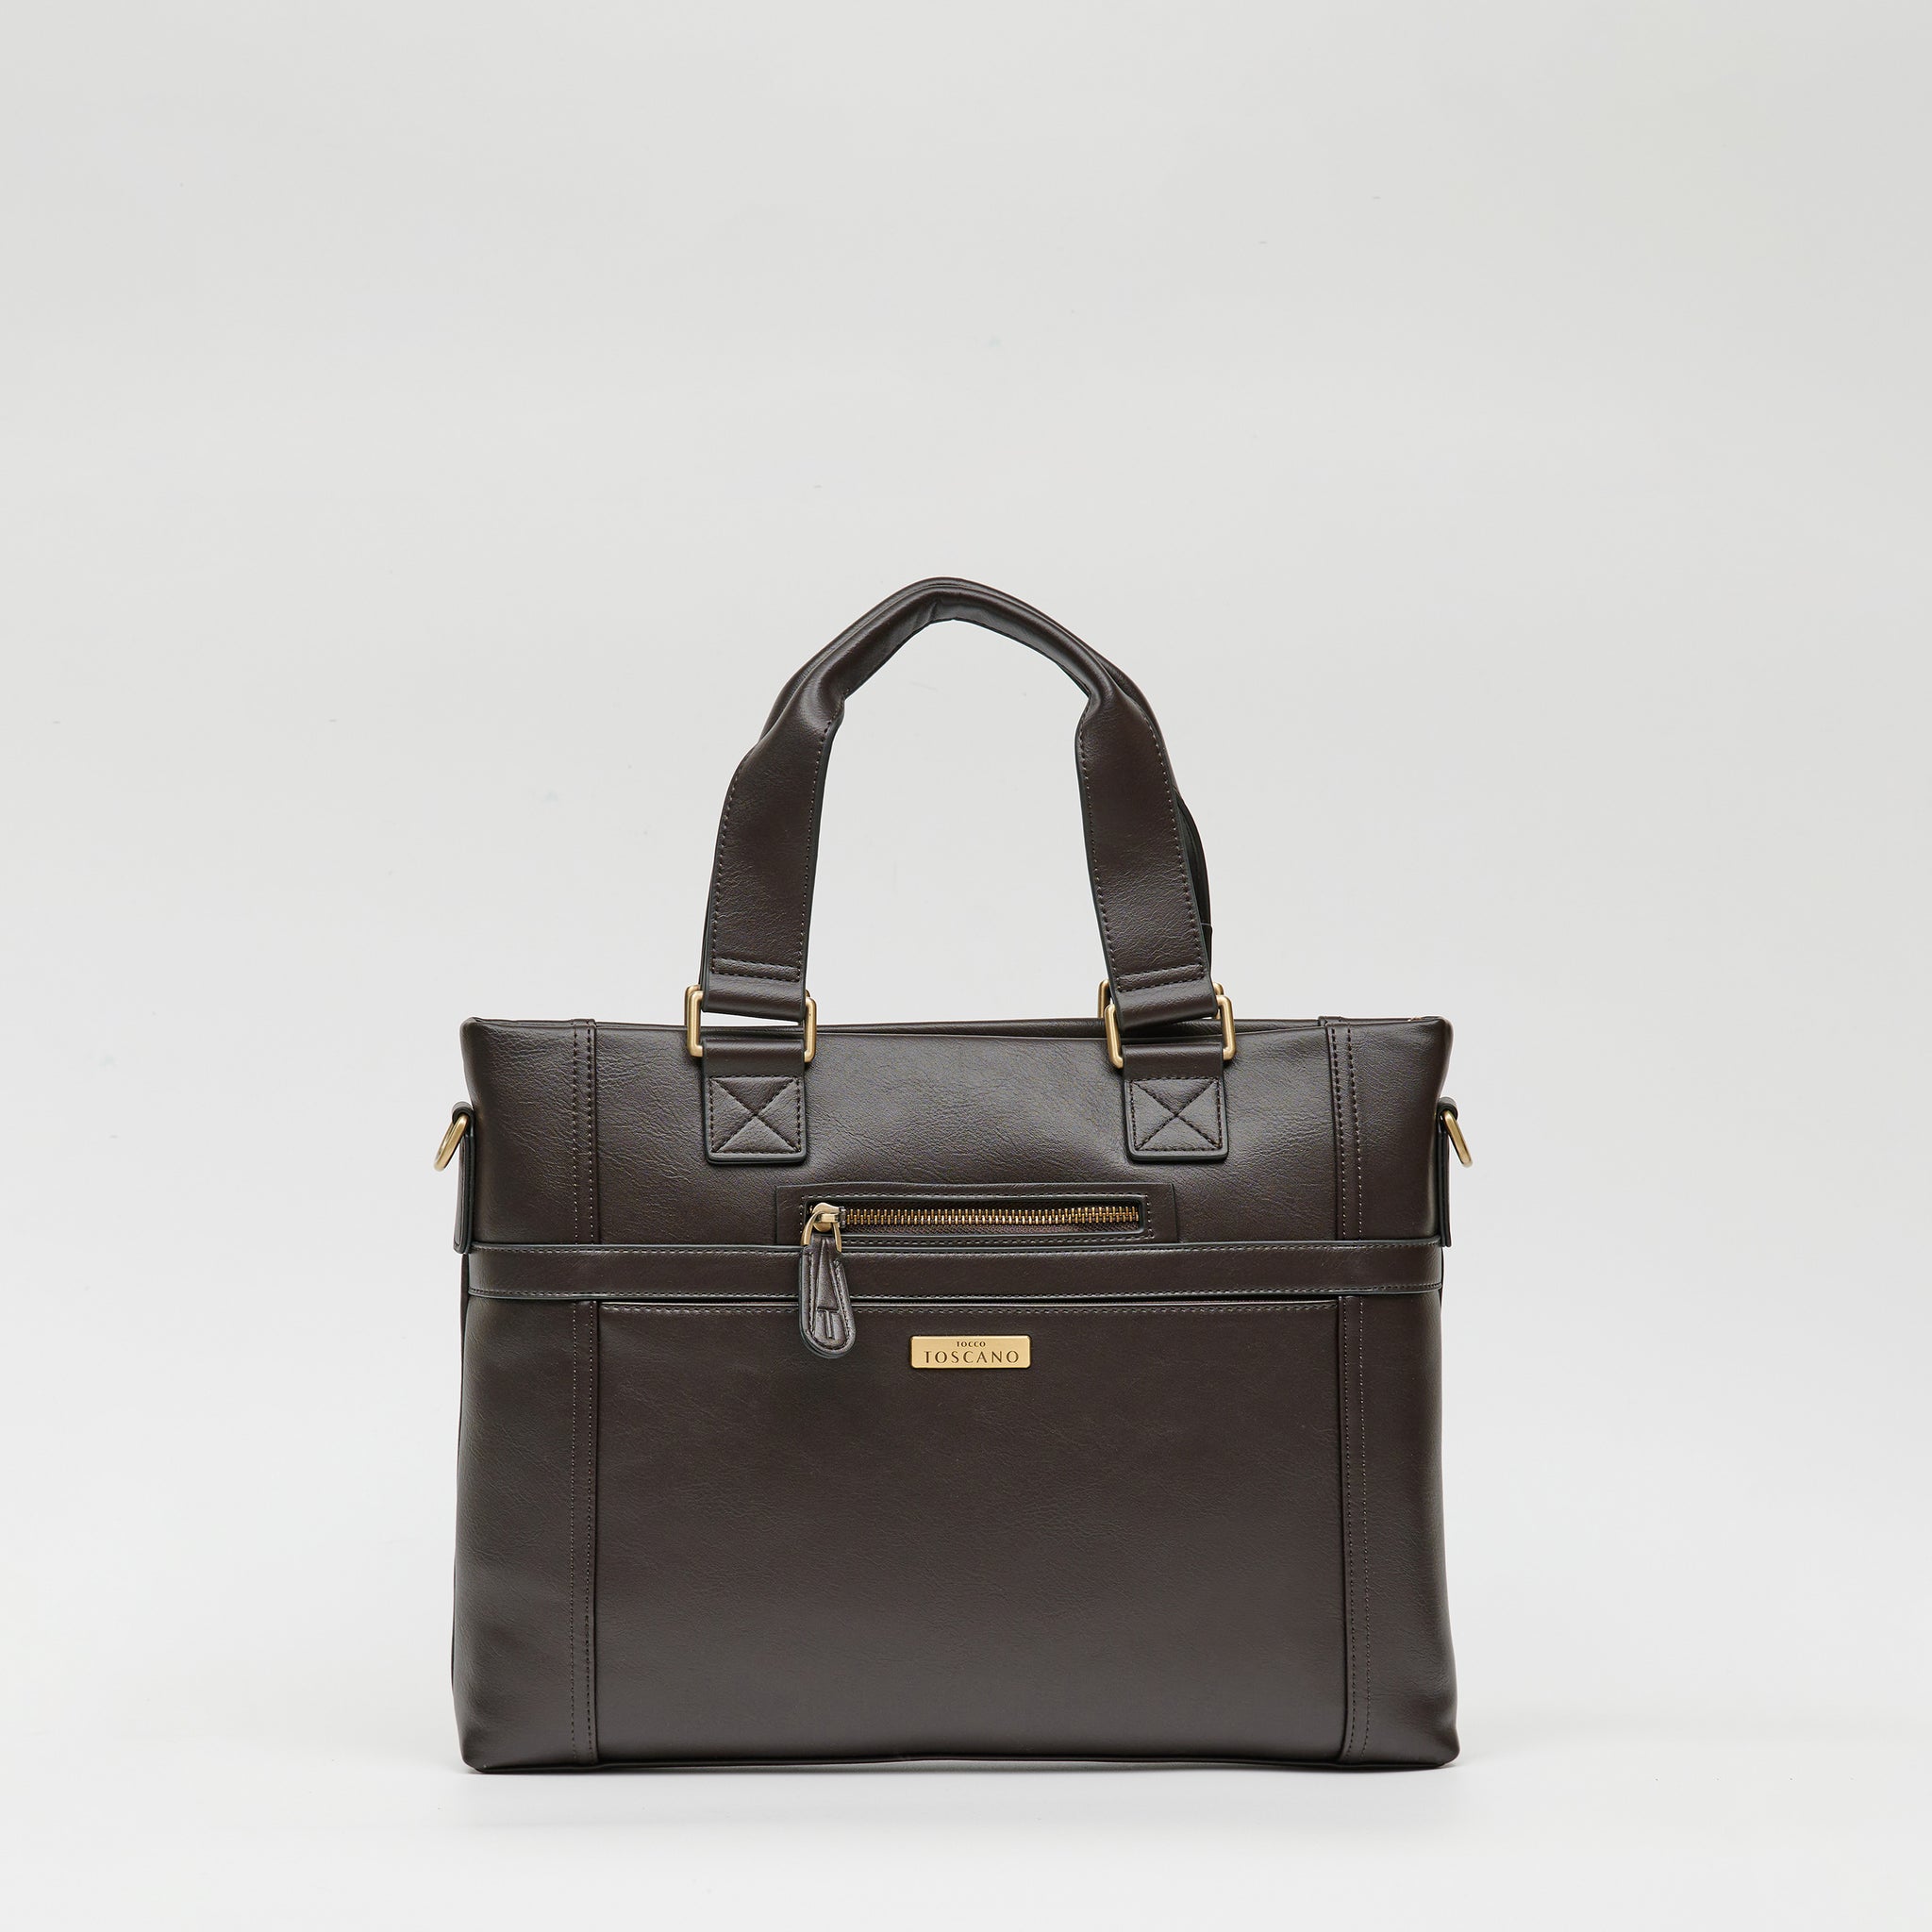 Marven Boxy Smart Casual Document Bag - Tocco Toscano